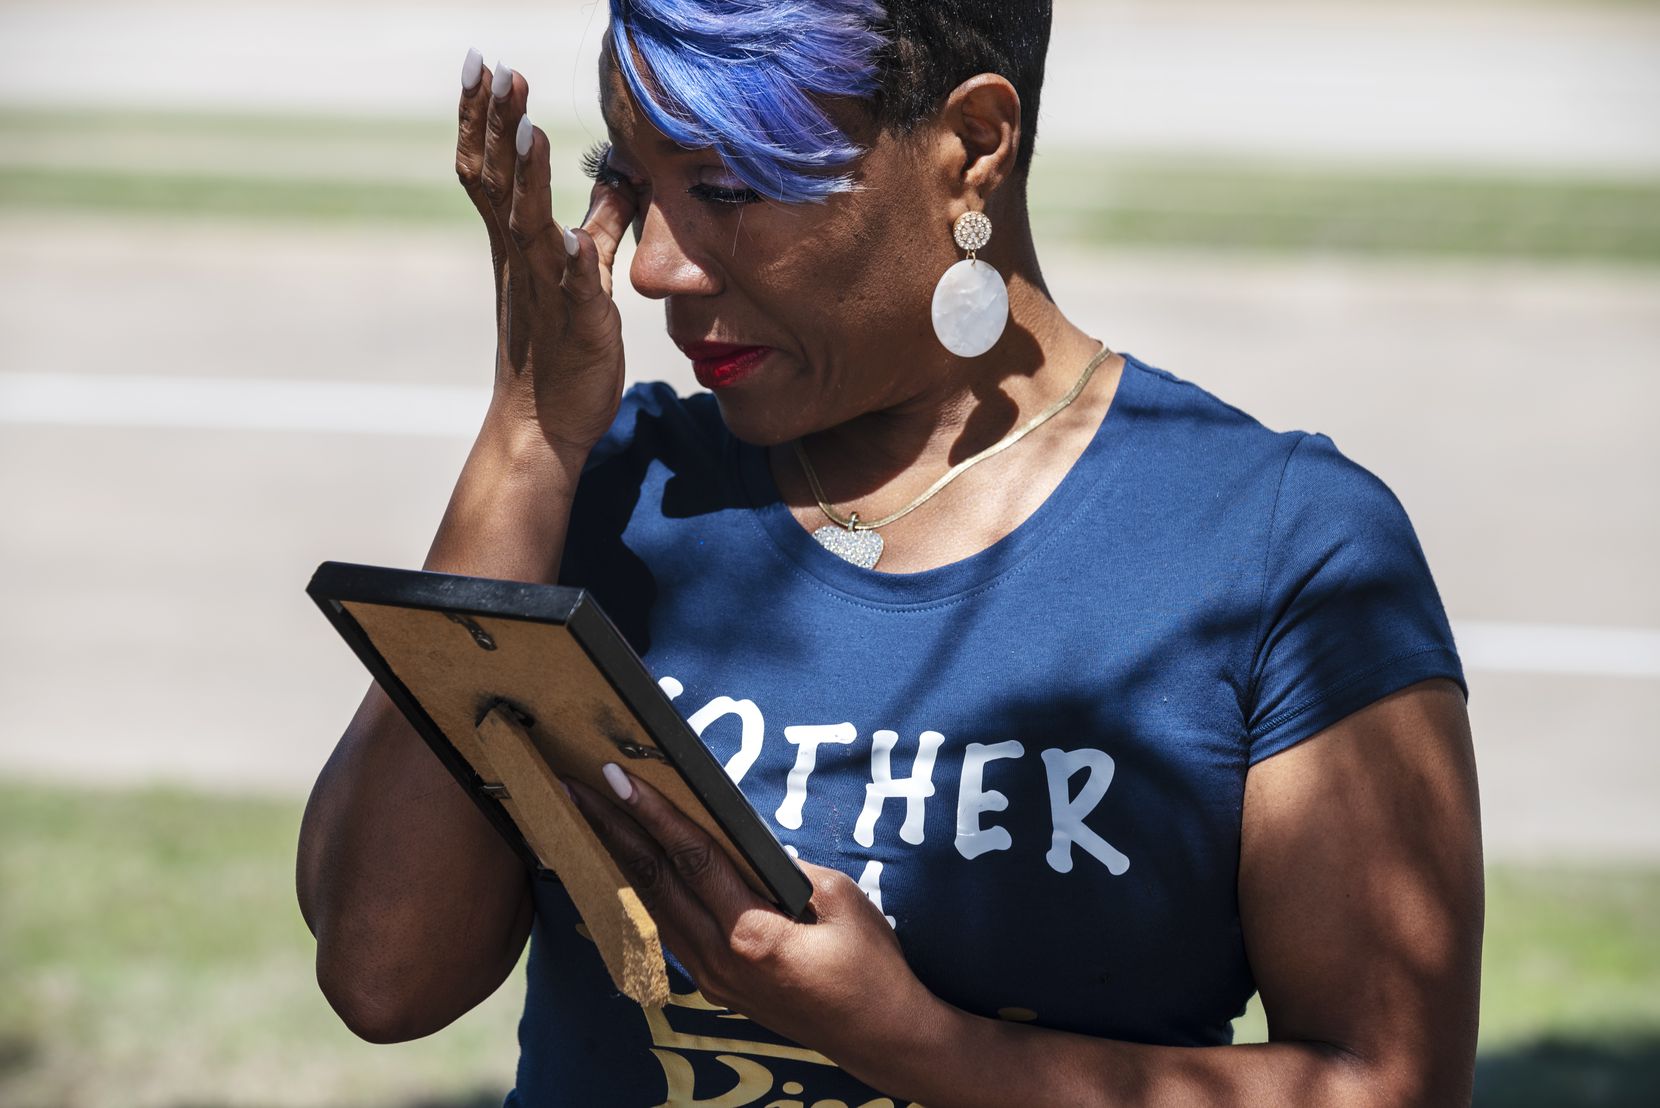 Donna Fields, 47, wipes away tears while looking at a photo of her son Marcus Bell Jr., when he was 12 years old. Bell says he was raped by Pastor Rickie Rush when he was 13. Fields and her sister also say Rush sexually assaulted them.